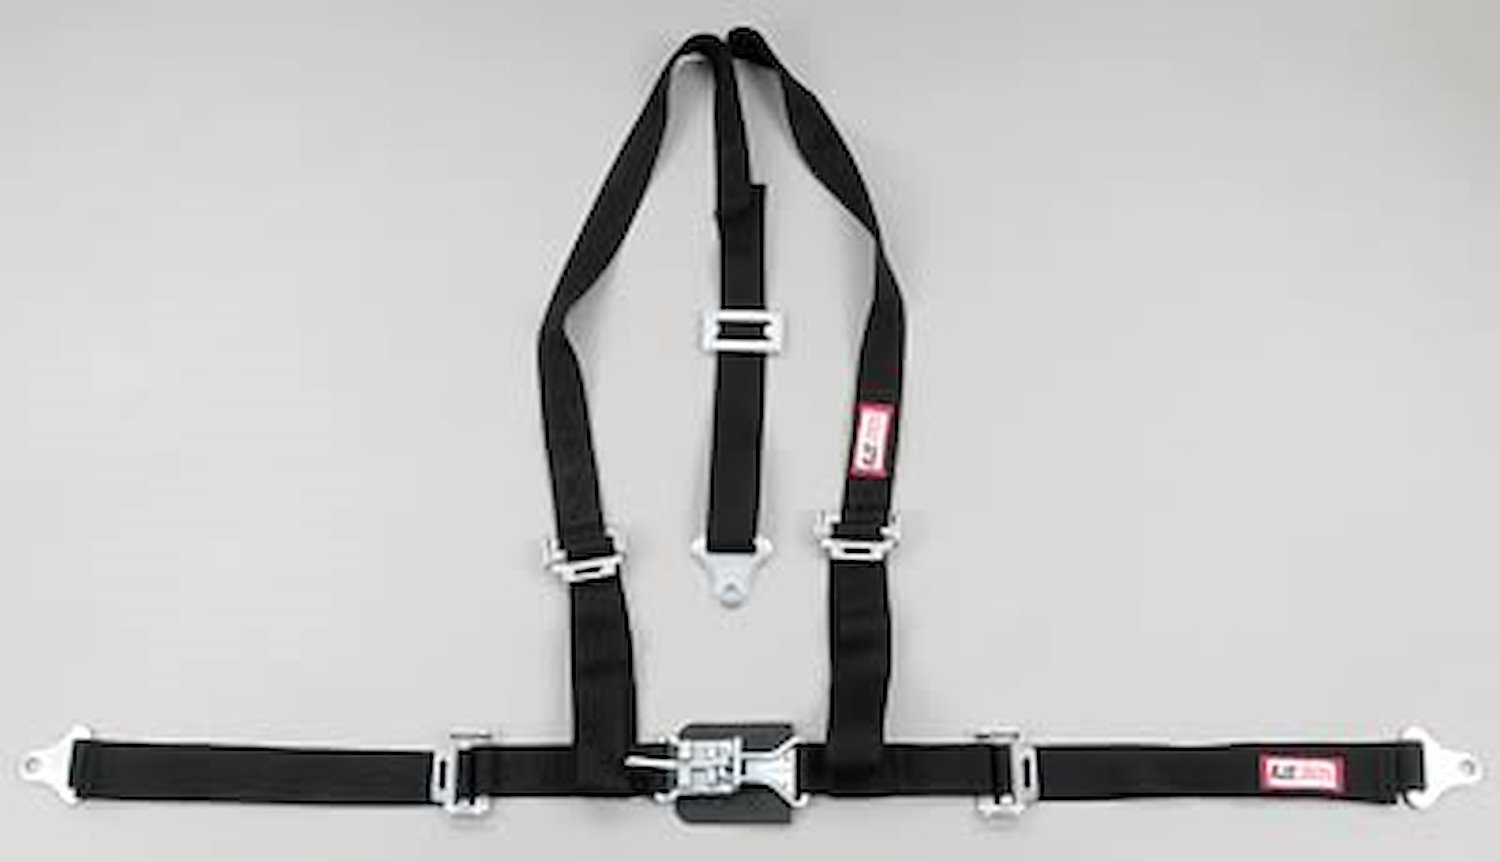 NON-SFI L&L HARNESS 3 PULL DOWN Lap Belt SEWN IN 2 S.H. Individual FLOOR Mount ALL WRAP ENDS GRAY